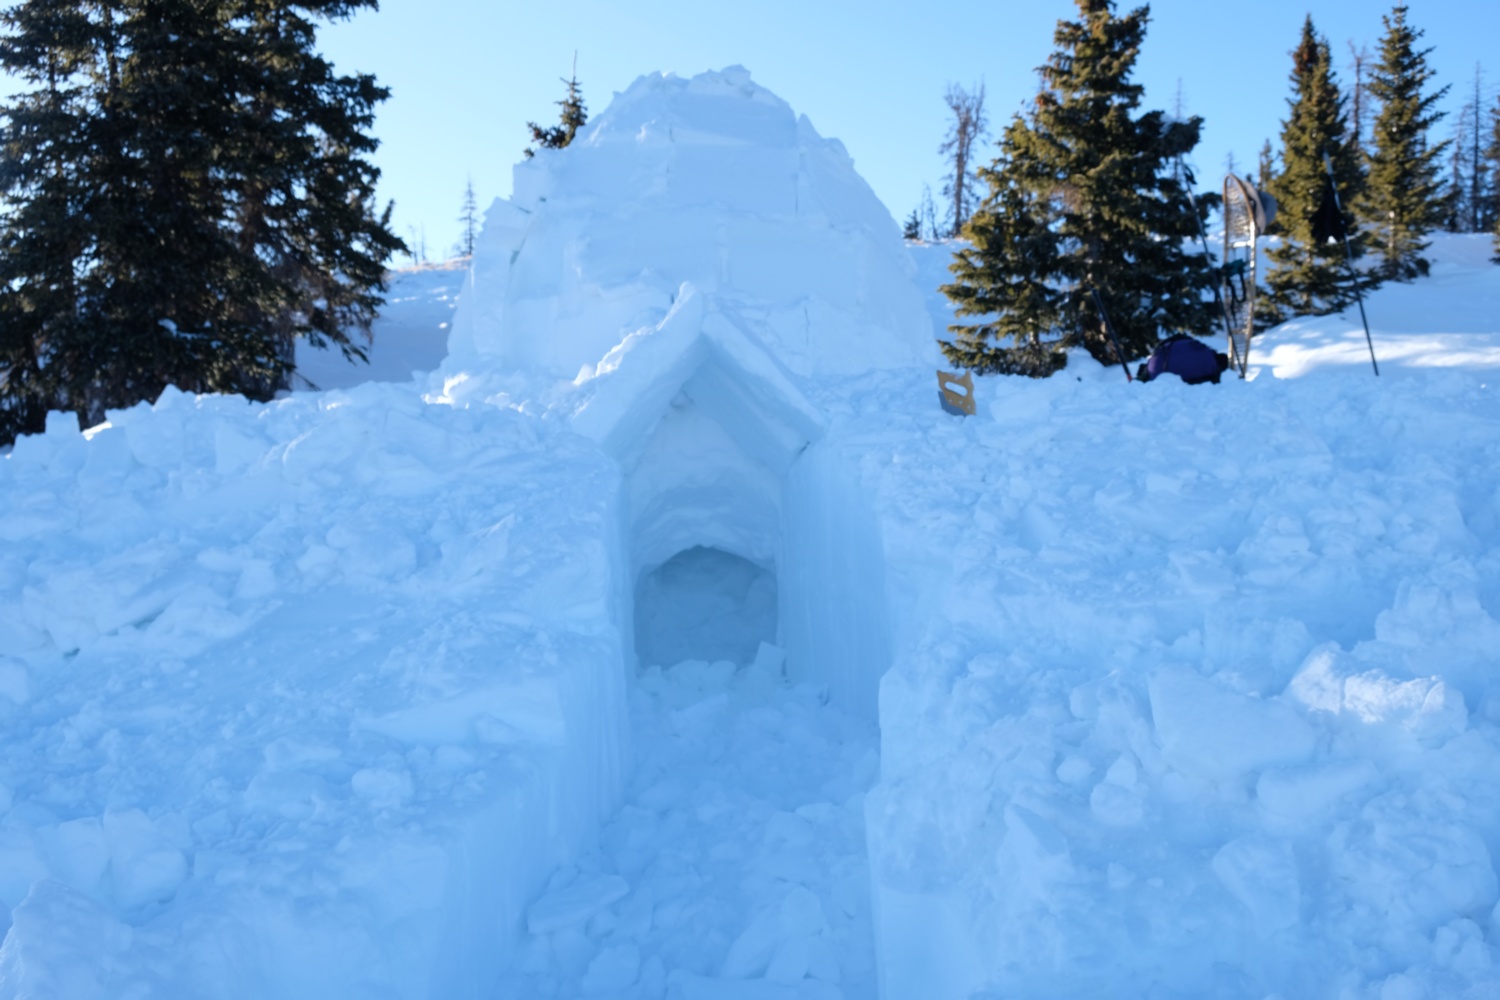 Finished igloo from below, looking at the entry.